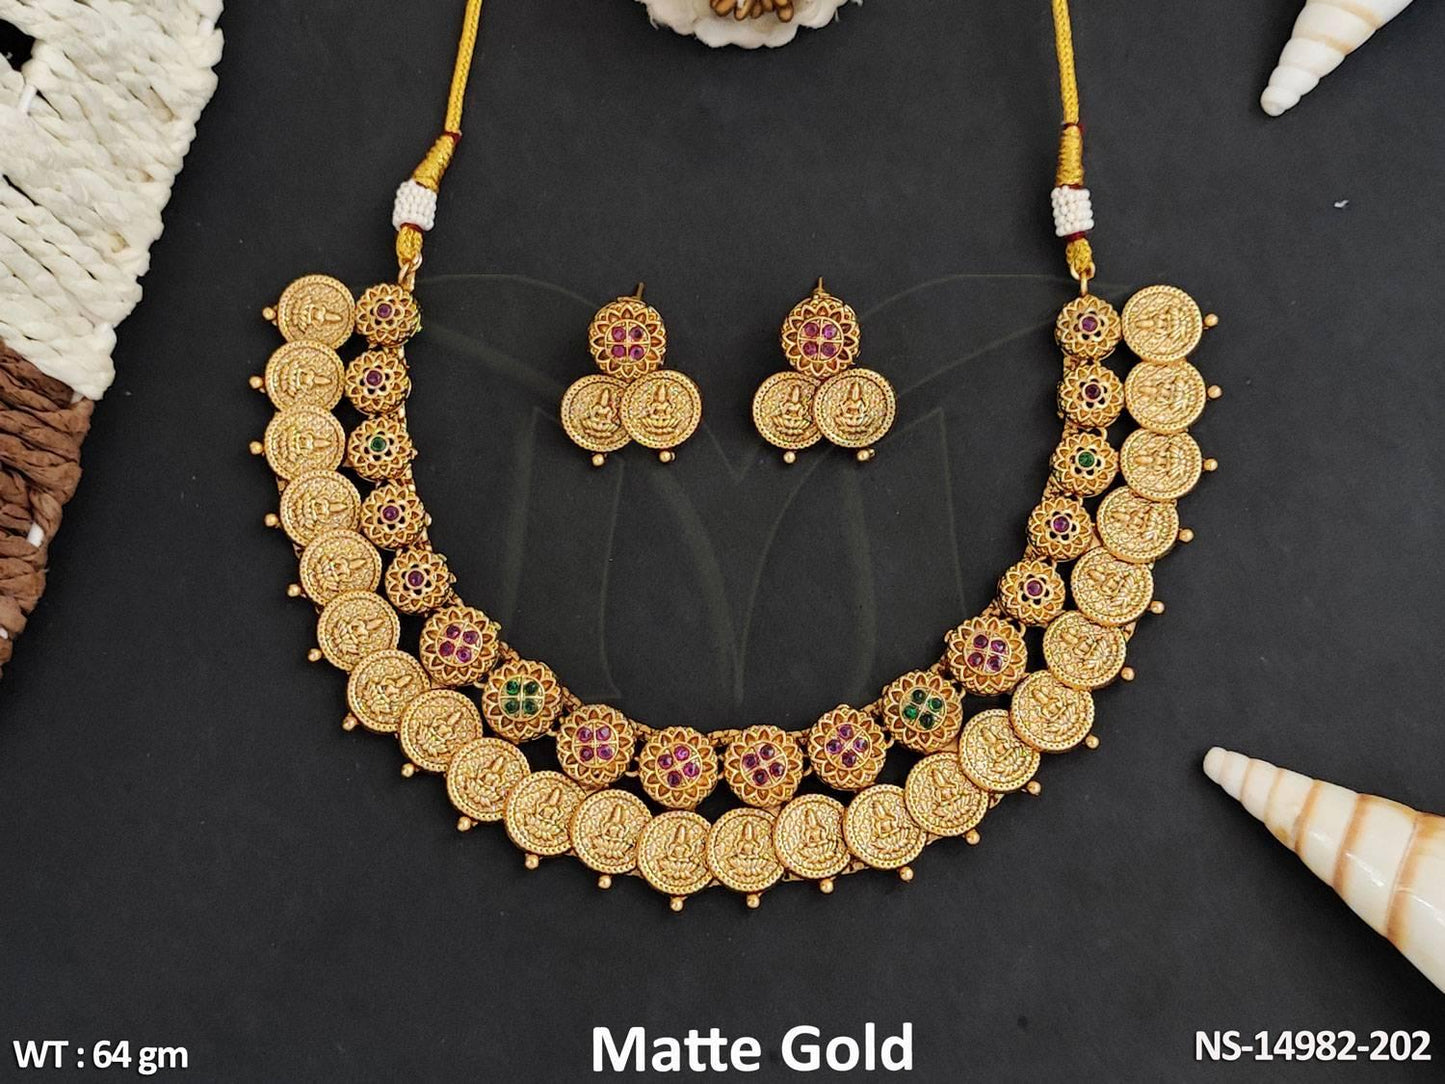 This stunning Temple Jewellery set features an attractive design with a matte gold polish.